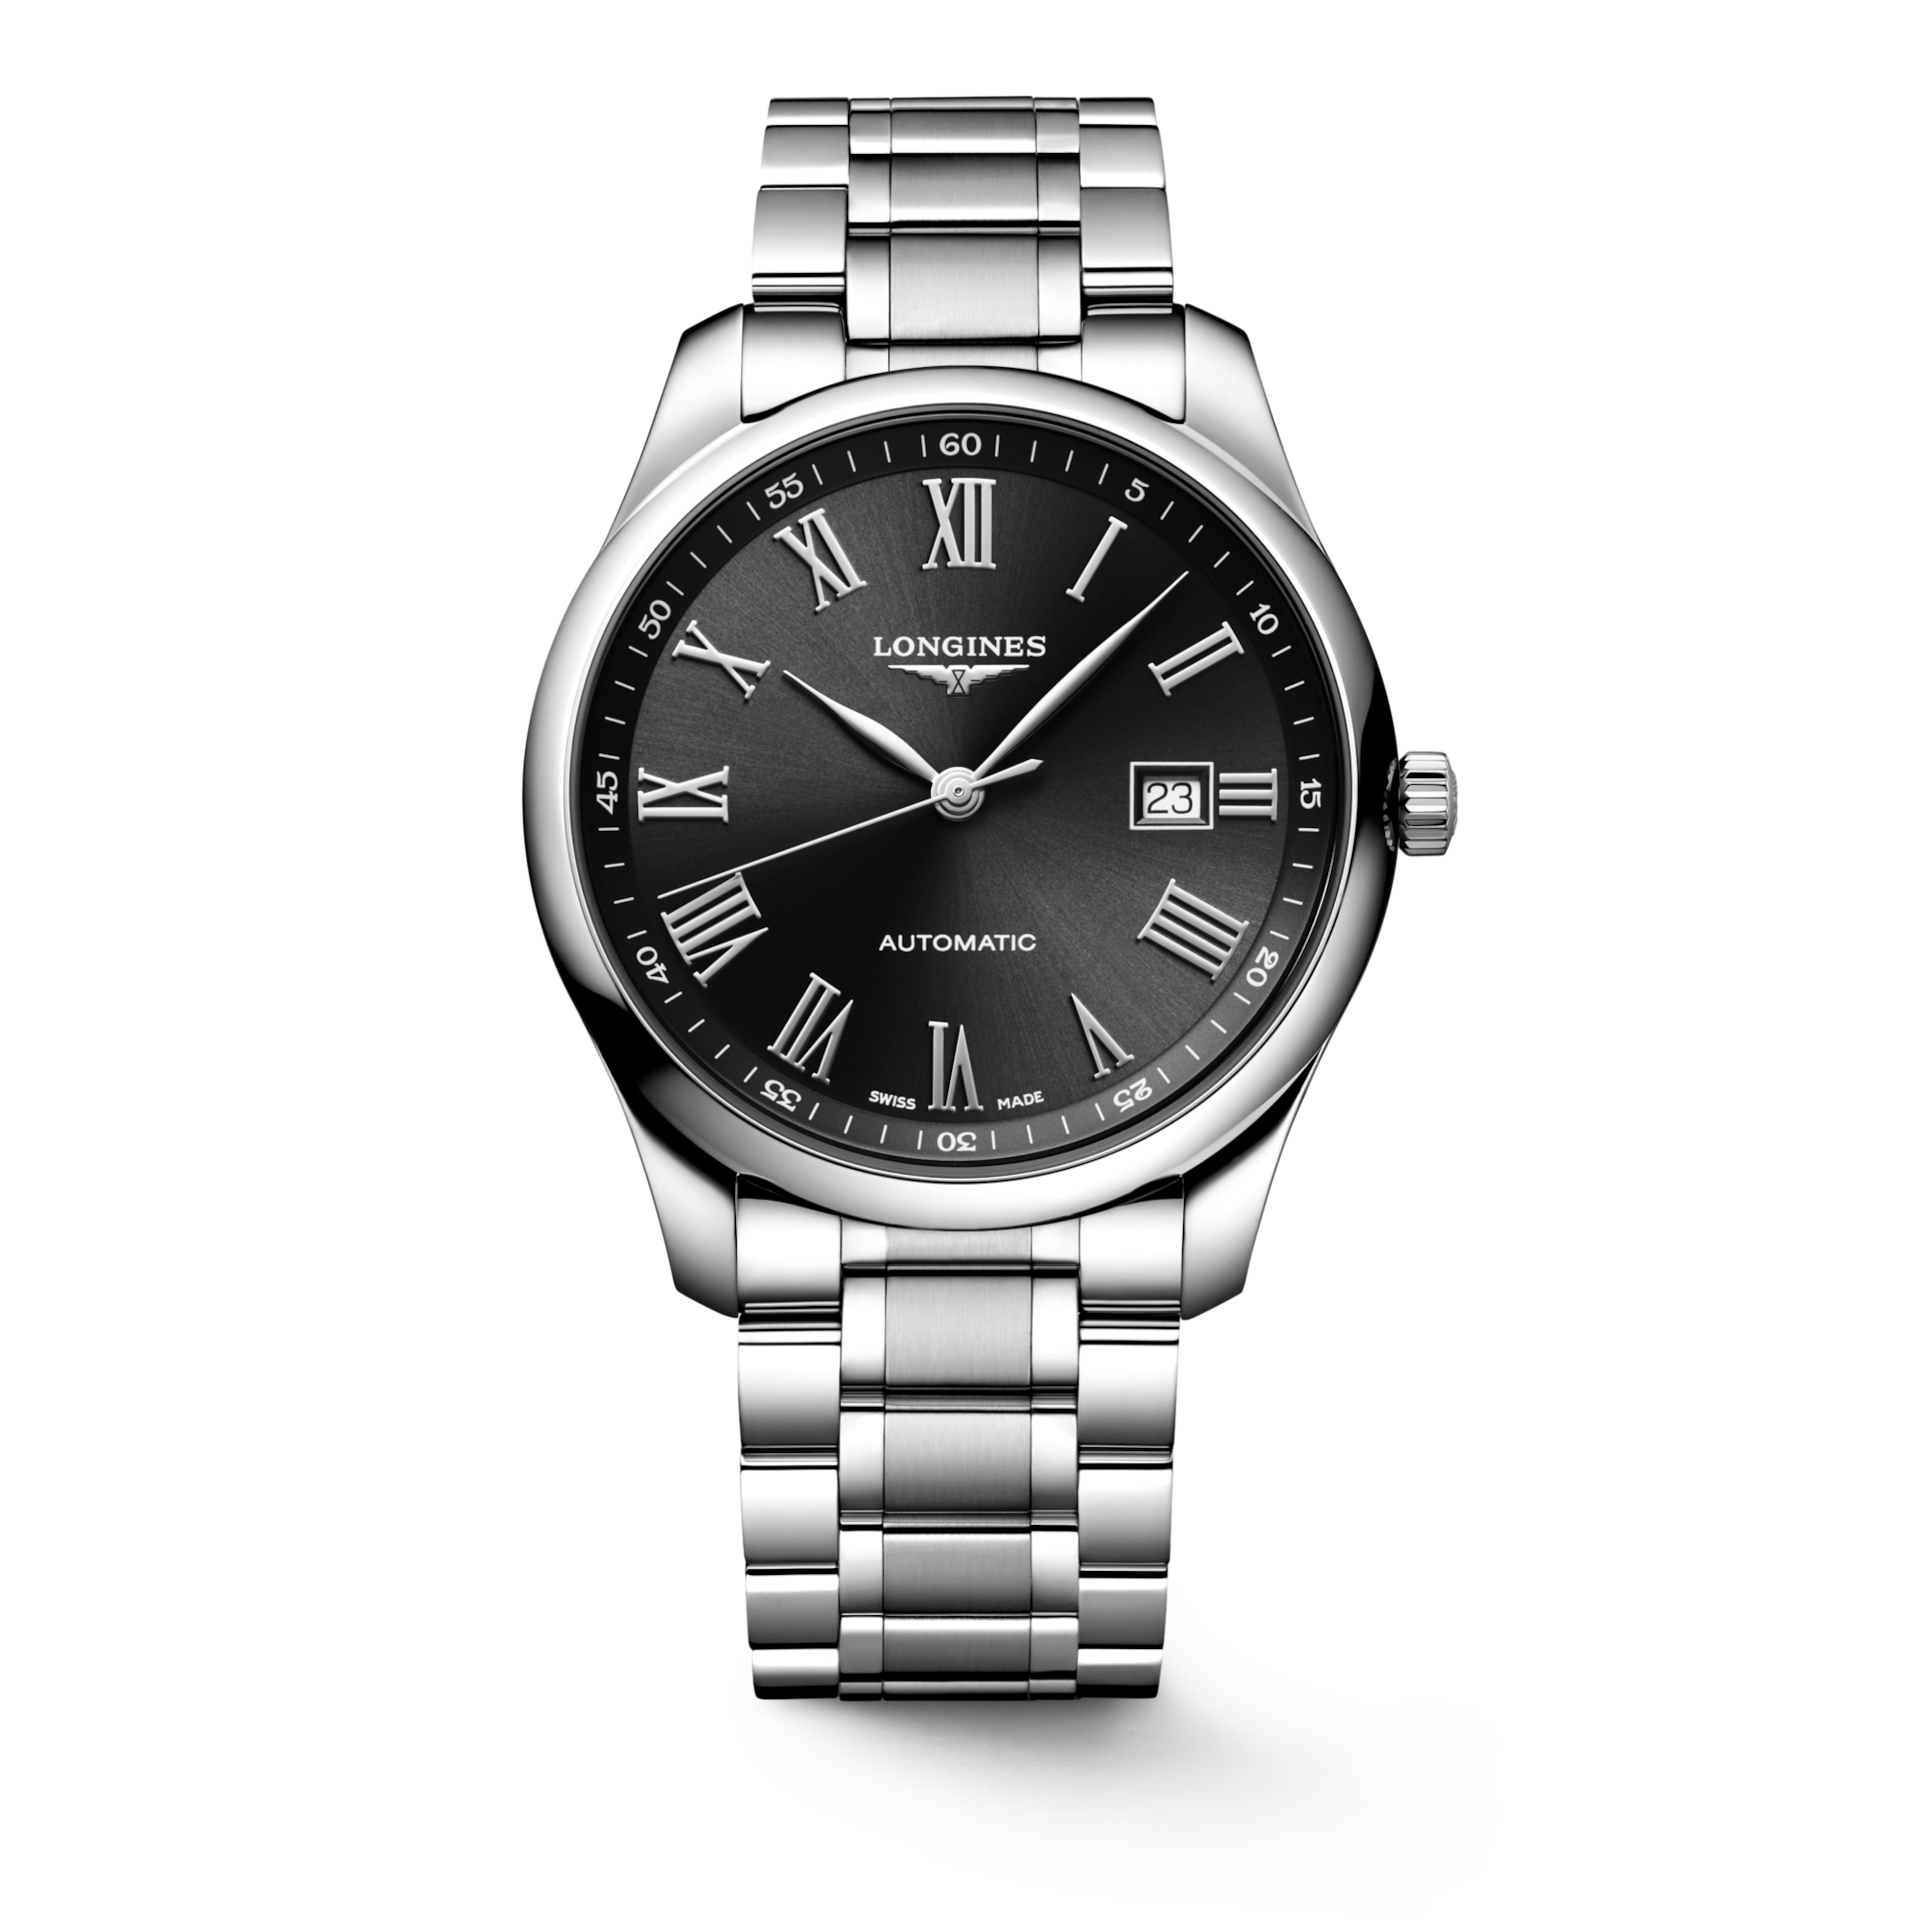 THE LONGINES MASTER COLLECTION L2.893.4.59.6